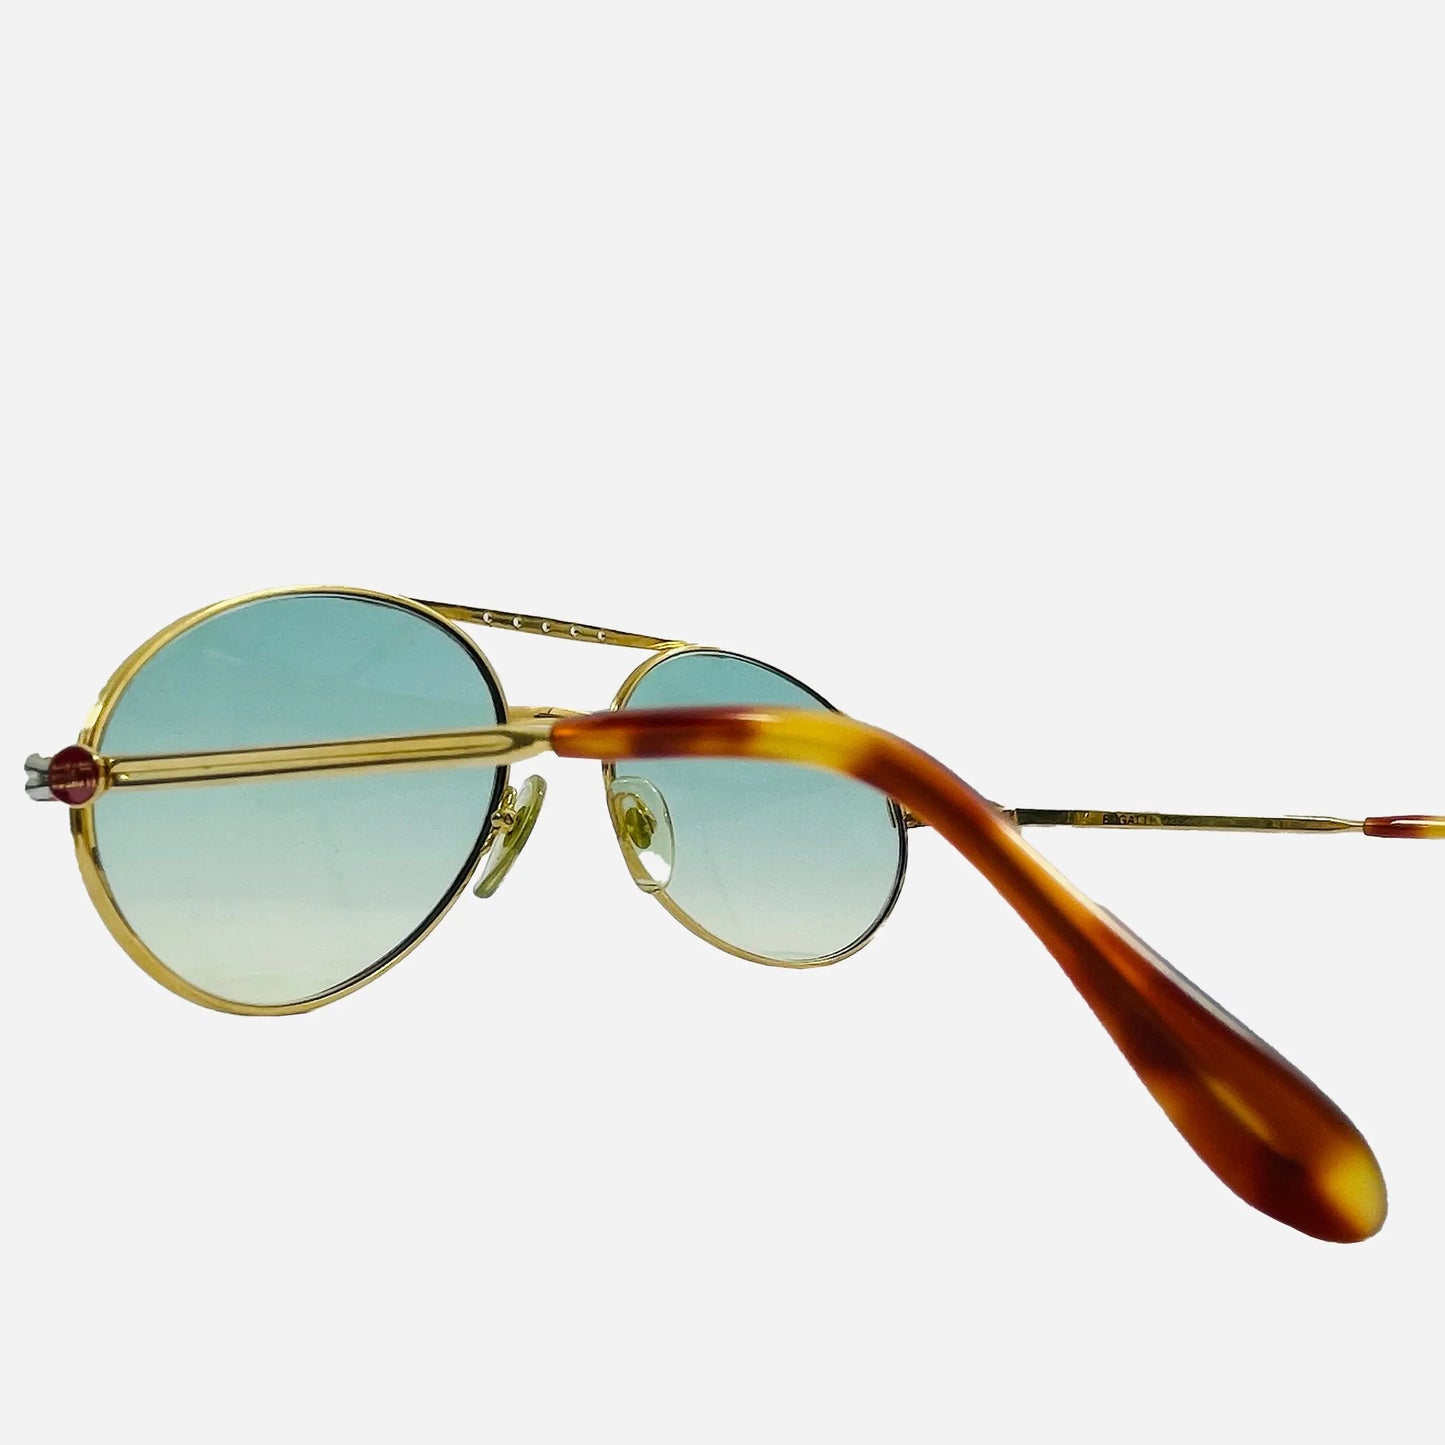 Ettore-Bugatti-Sonnenbrille-Sunglasses-Gold-Plated-14CT-the-seekers-side-temple